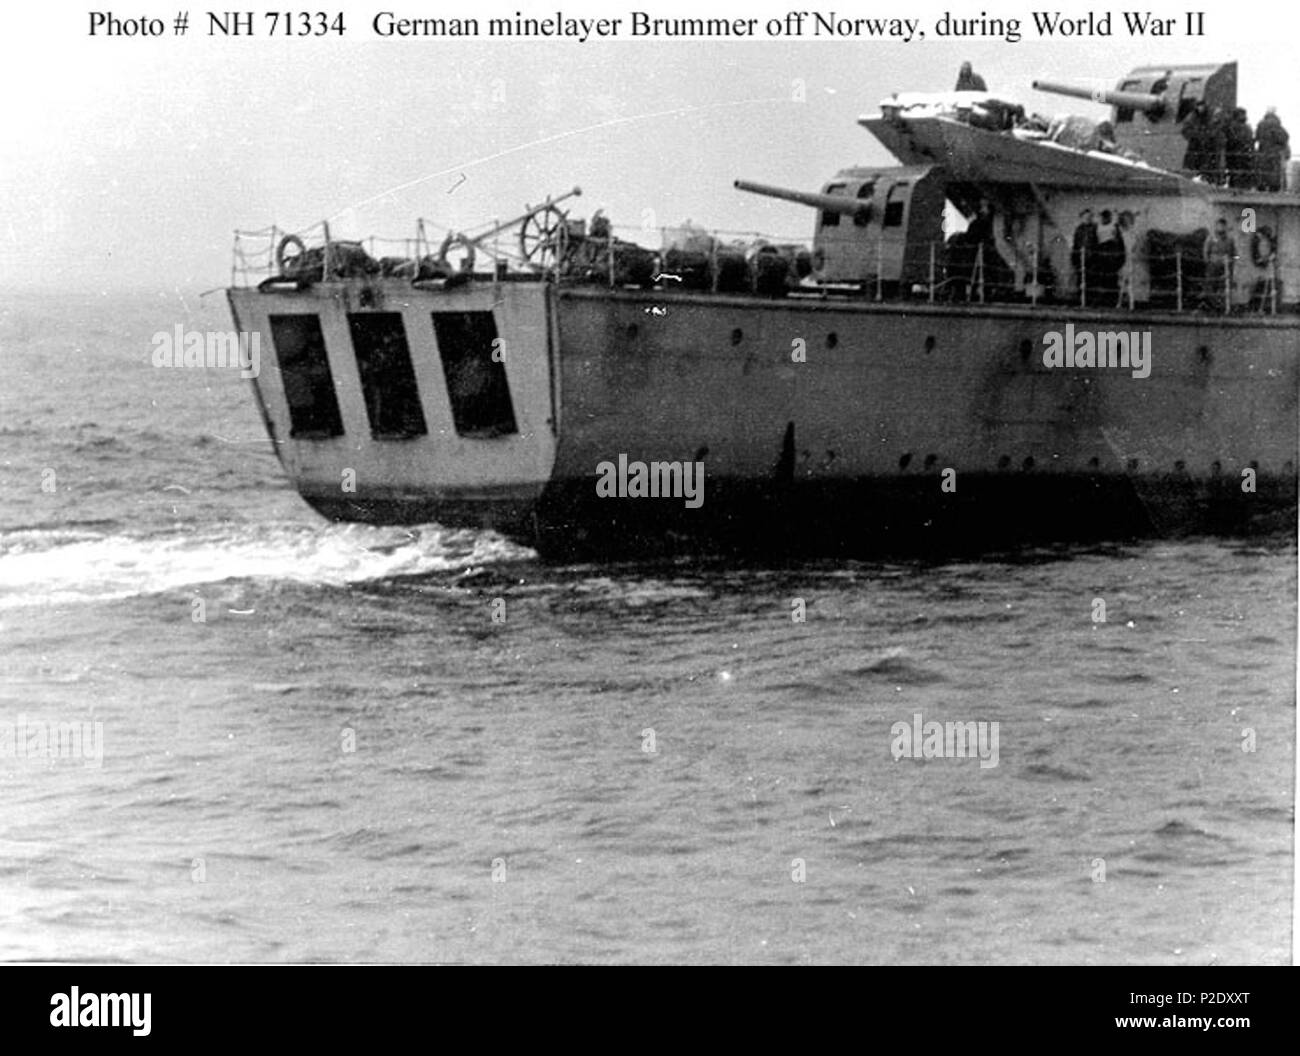 . The mine launching doors and aft guns of the Brummer (former HNoMS Olav Tryggvason) . 1940-1944, the time she operated off Norway.. Unknown 9 Brummer's mine launching doors Stock Photo